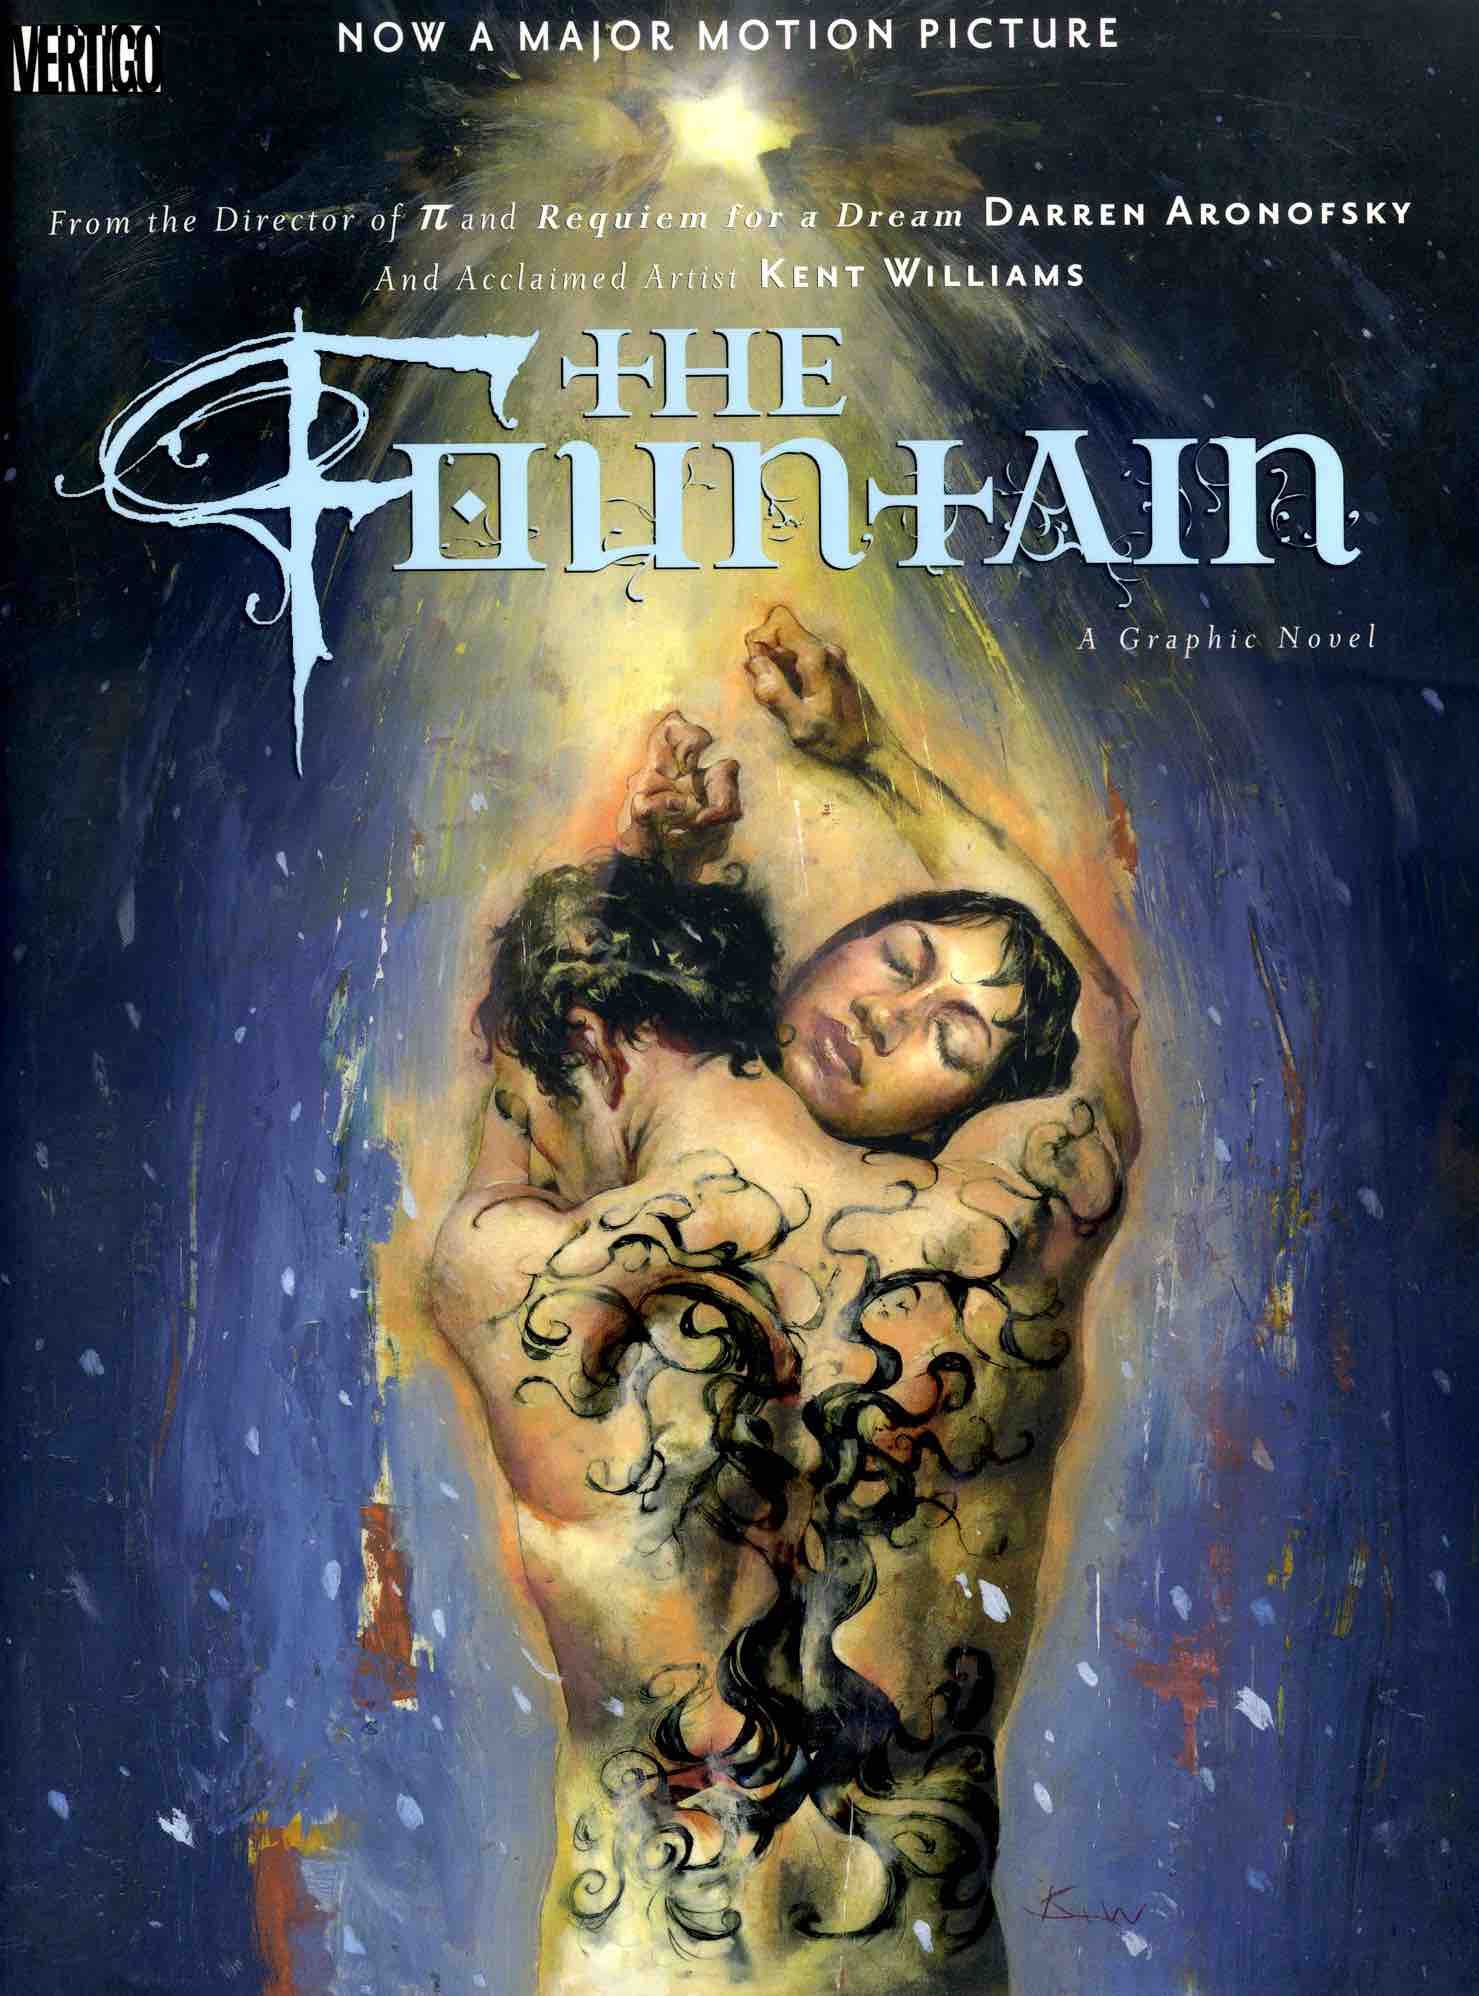 Cover of "The Fountain" by Aronofsky and Kent Williams